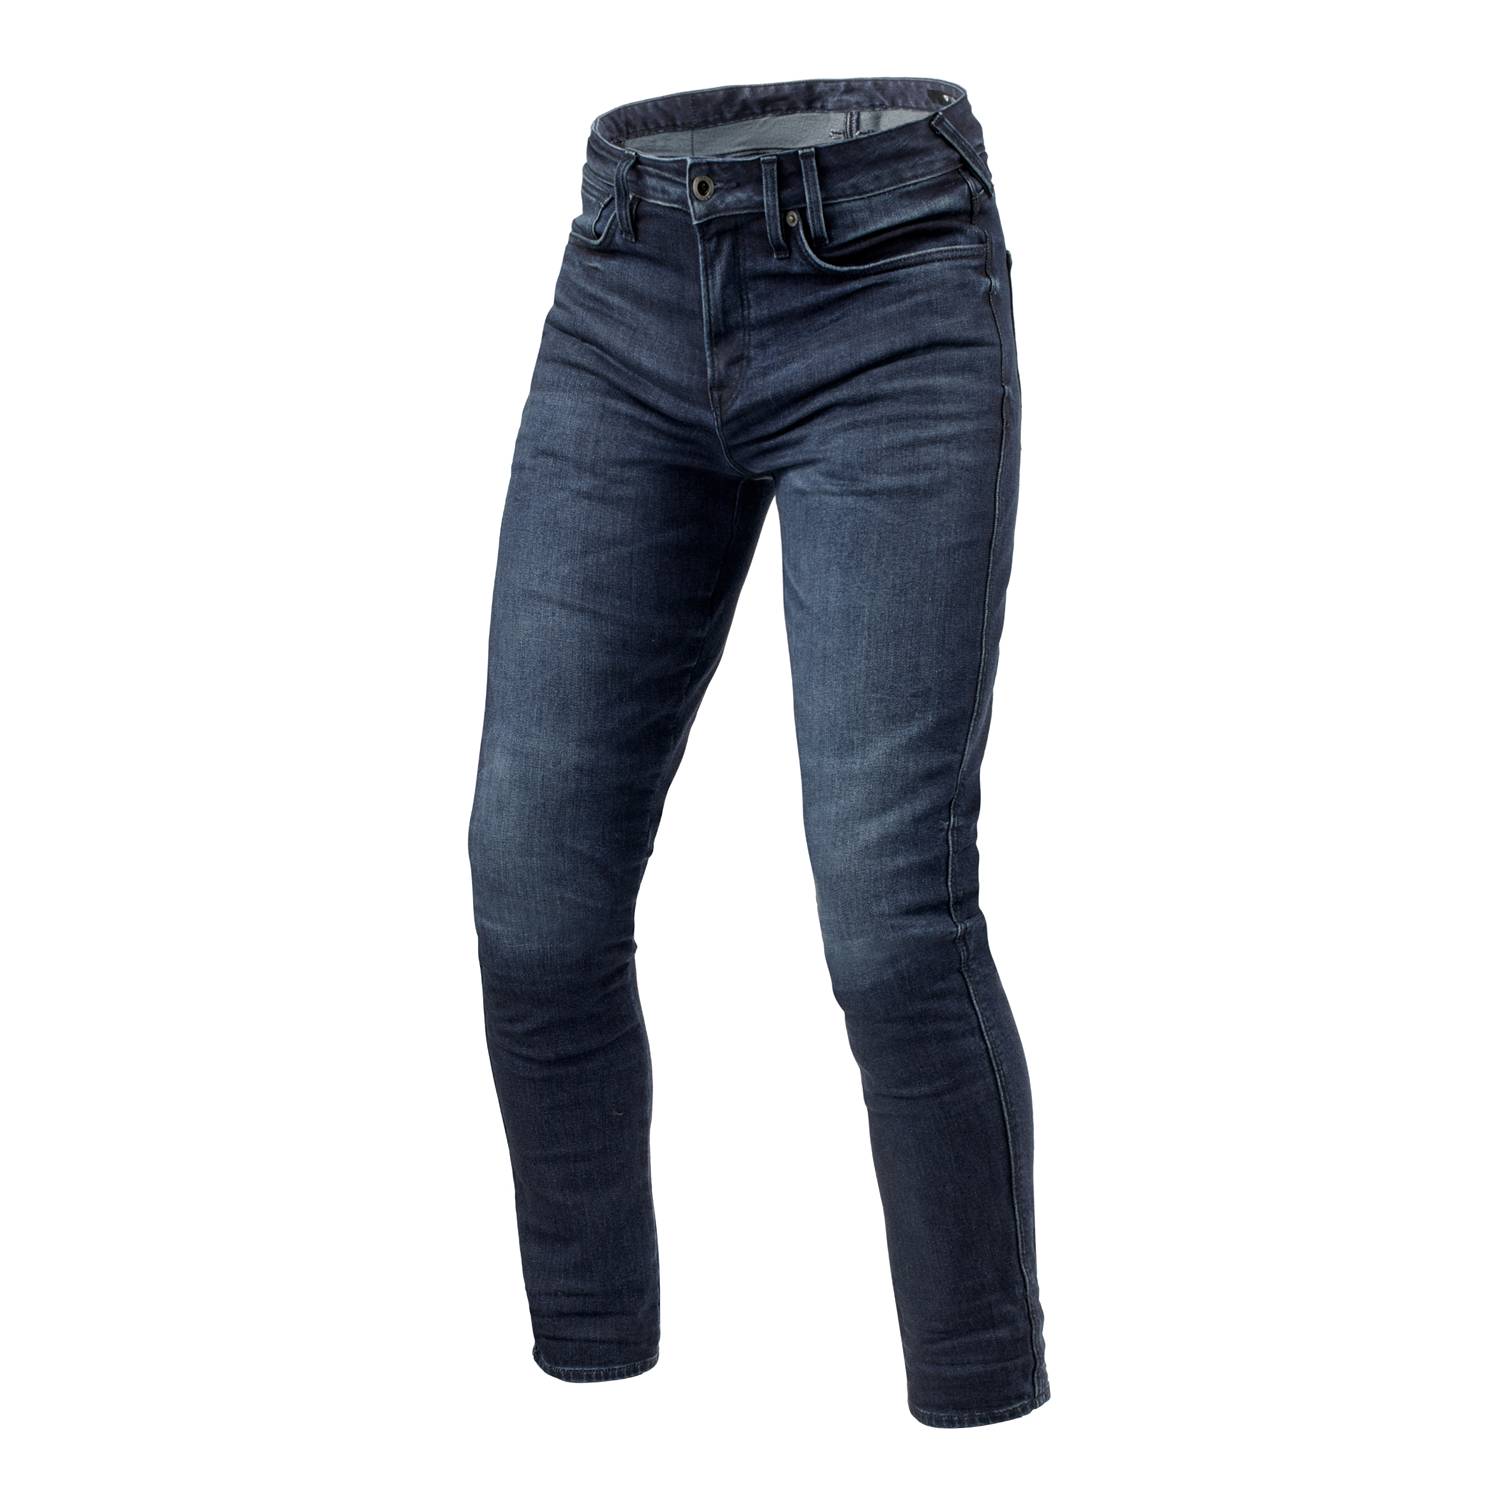 Image of EU REV'IT! Jeans Carlin SK Dark Blue Used L34 Motorcycle Jeans Taille L34/W30